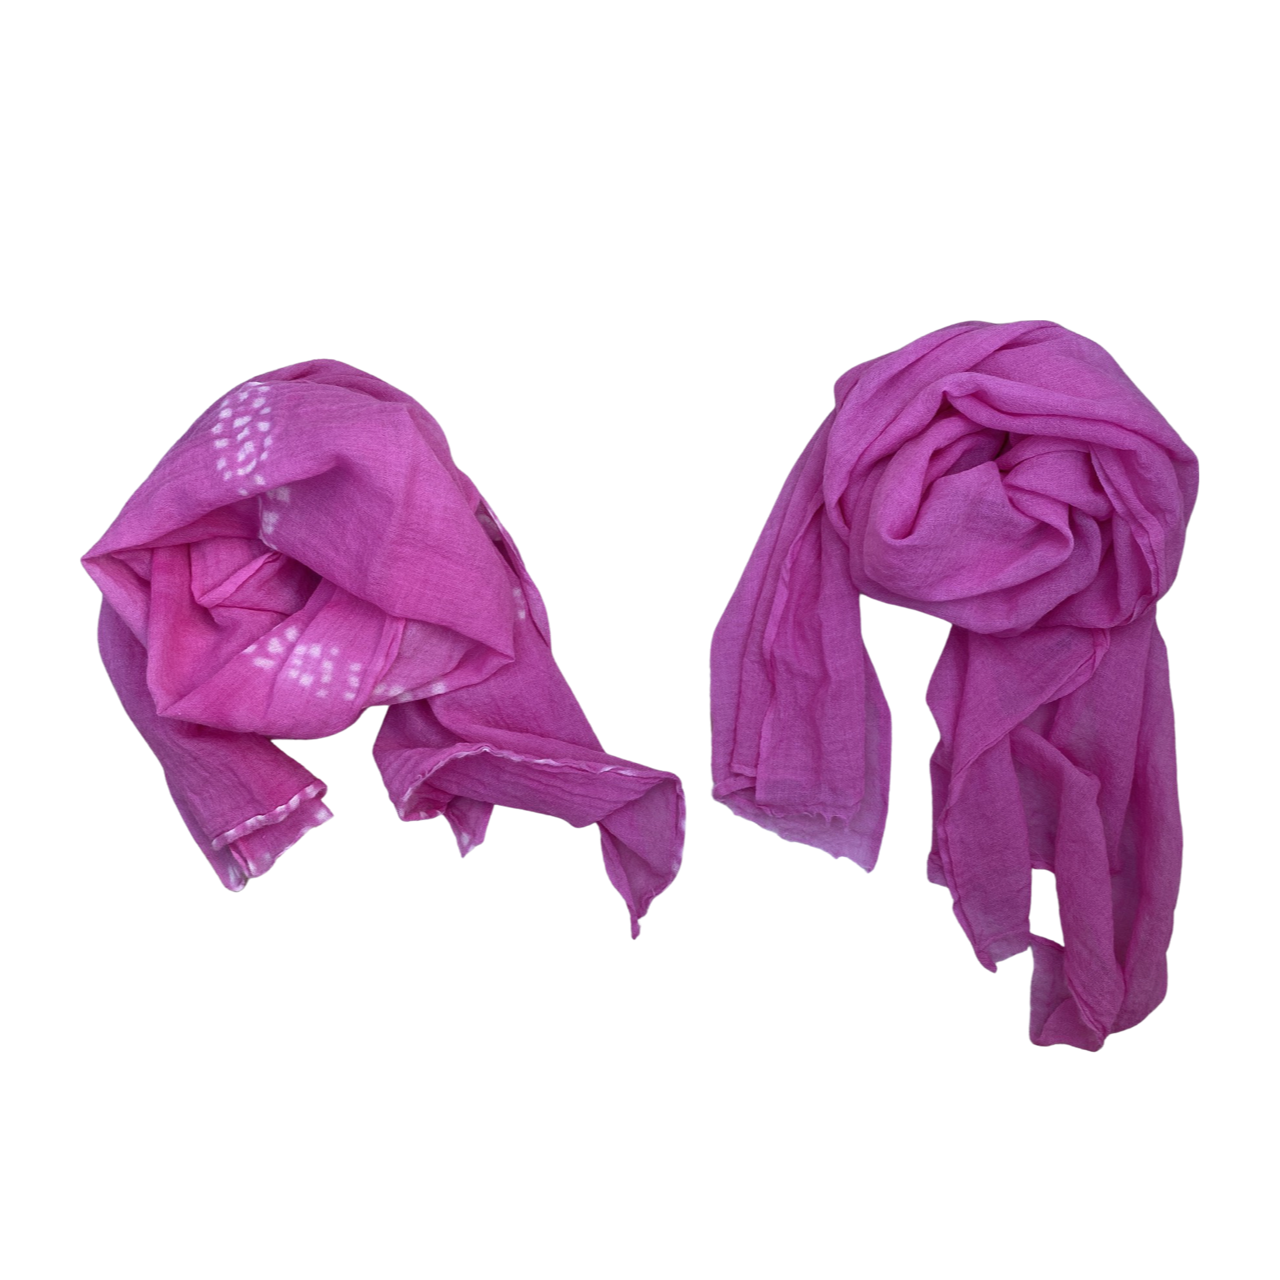 Patterned One-of-a-Kind Hand-Dyed Wool Gauze Scarf in Electric Orchid by 1 Life - Hand-Dyed Wool Scarf for Warm or Cold Weather